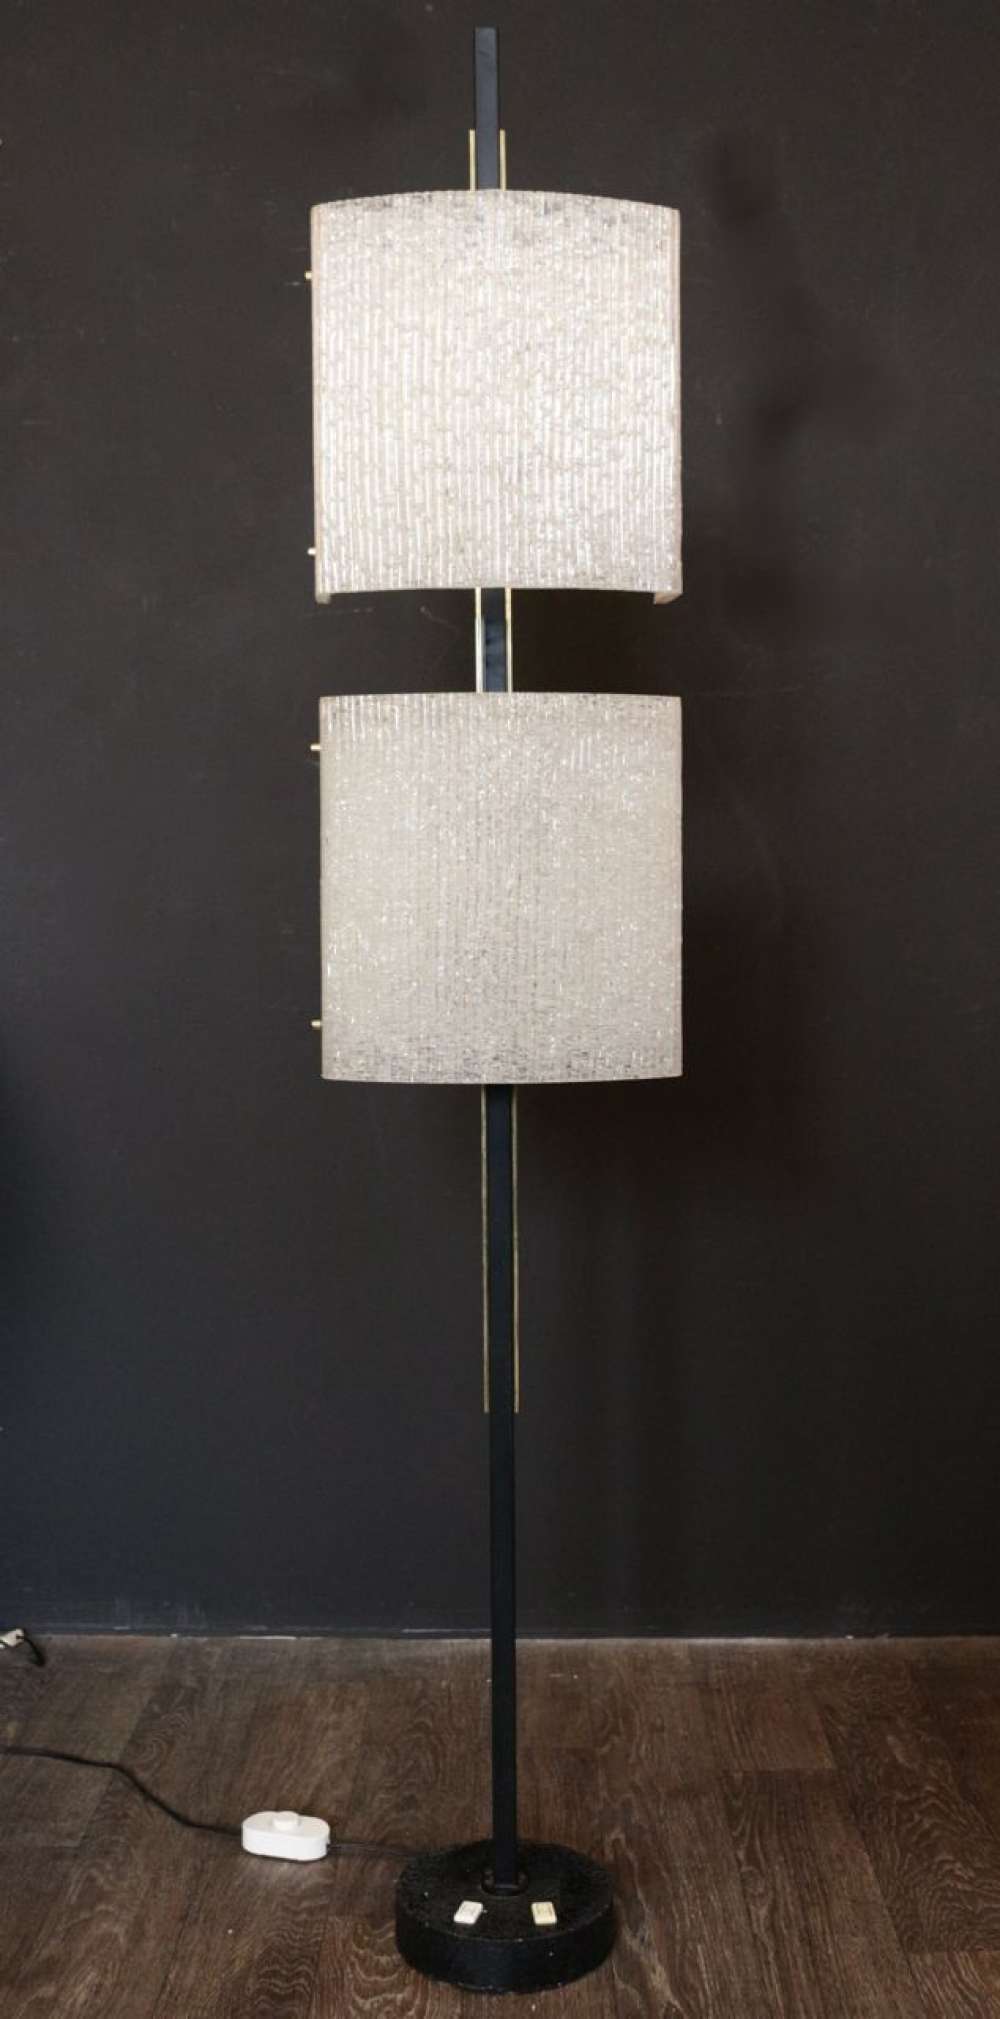 1960s floor lamp by Maison Arlus. Composed of two frosted plastic tiles held by a black lacquered metal rod with sides inlayed in two brass wands enhancing the design. Round base with two independent switchers. One for each light.

Very good